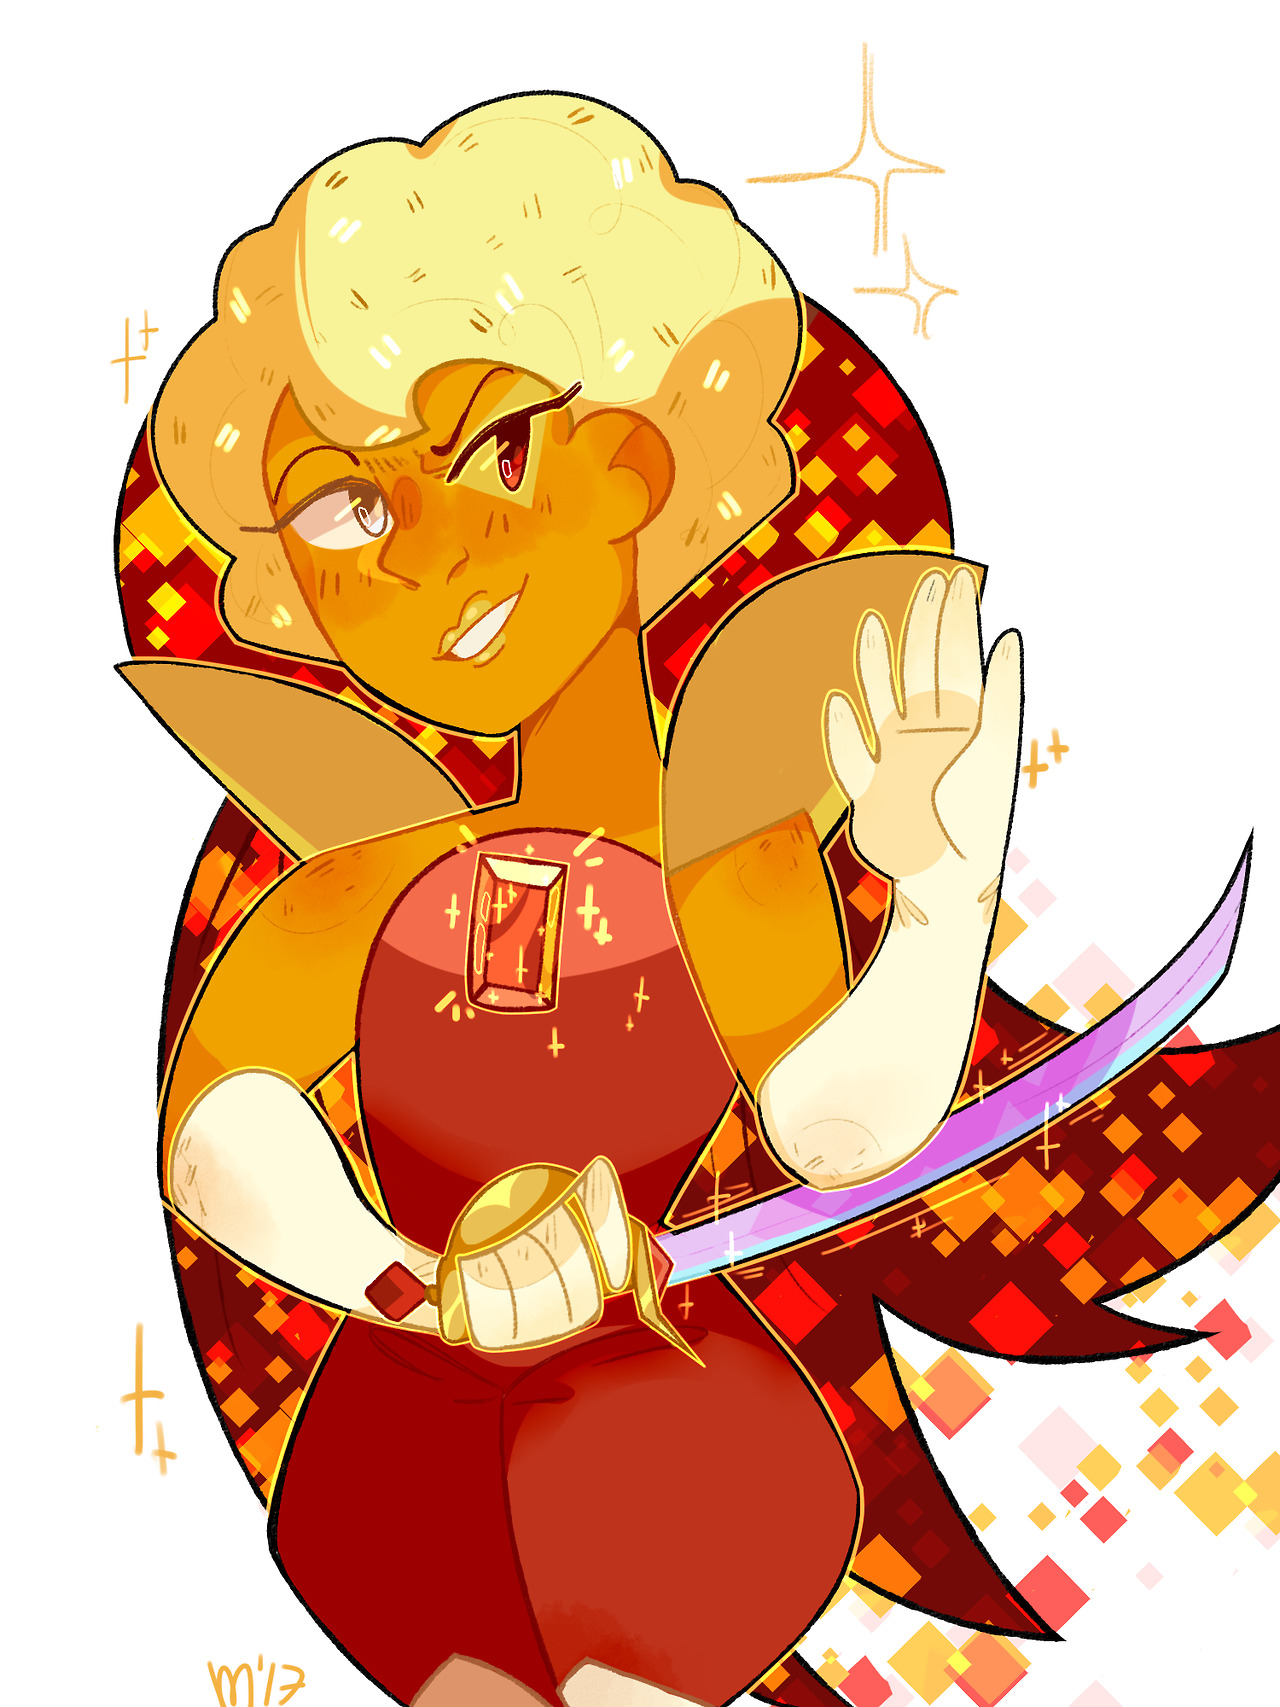 hessonite looks really cool,,,,, i actually really proud of this art.. it’s like so bright and sunny